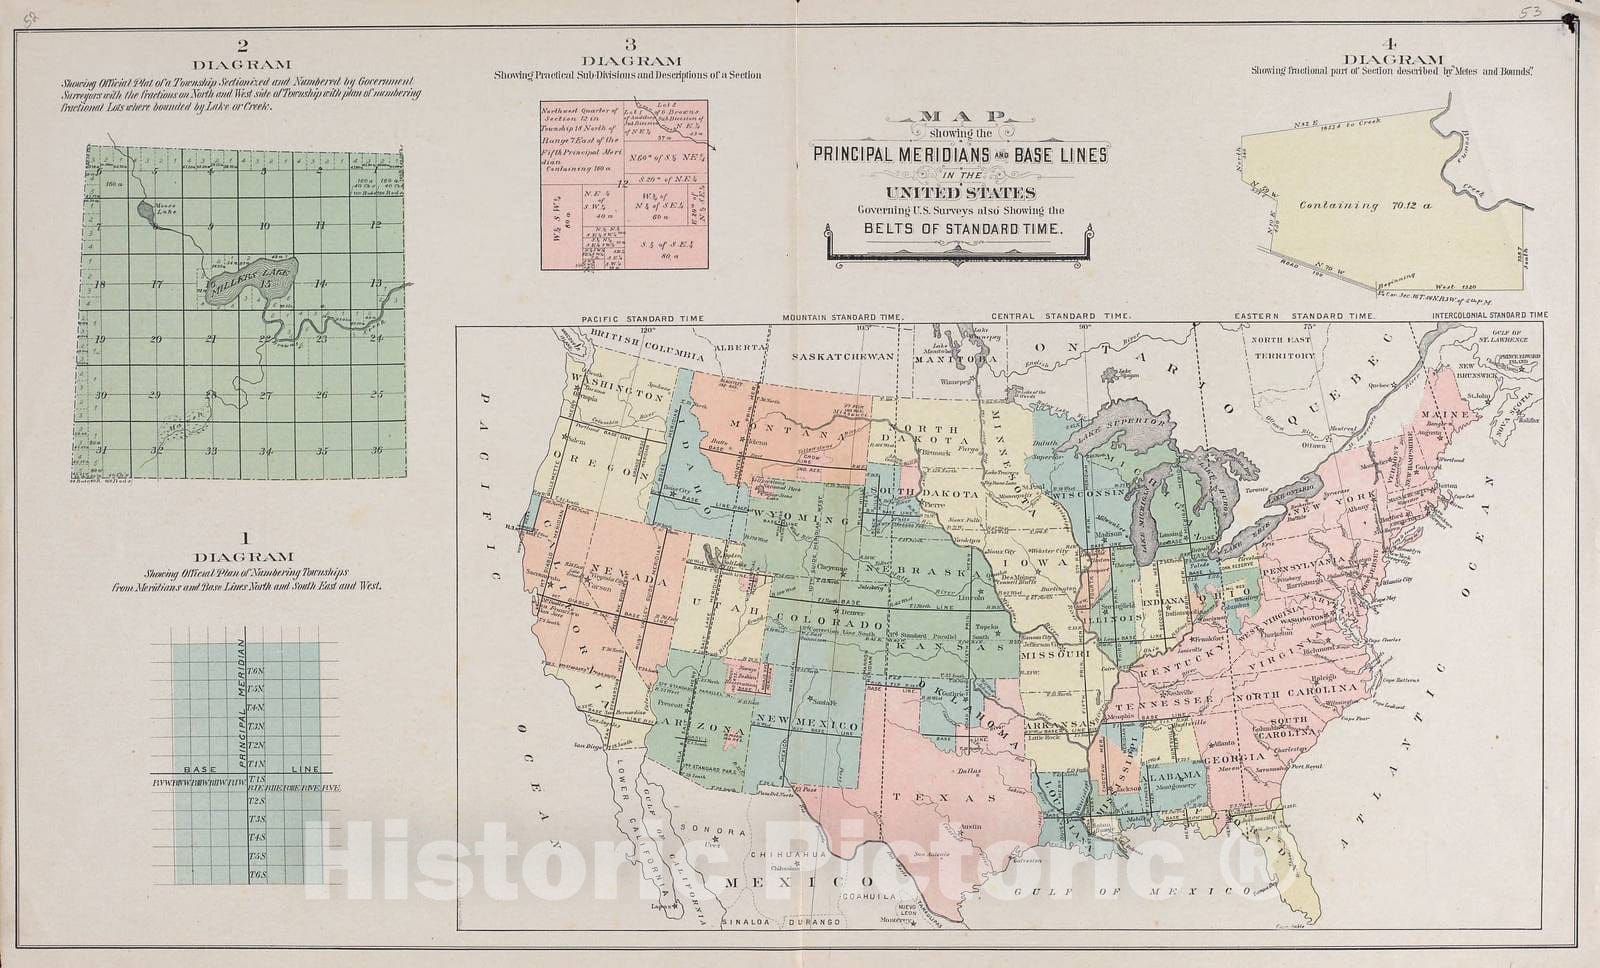 Historic 1917 Map - Atlas of Allamakee County, Iowa - Showing The Principal Meridians and Base Lines in The United States